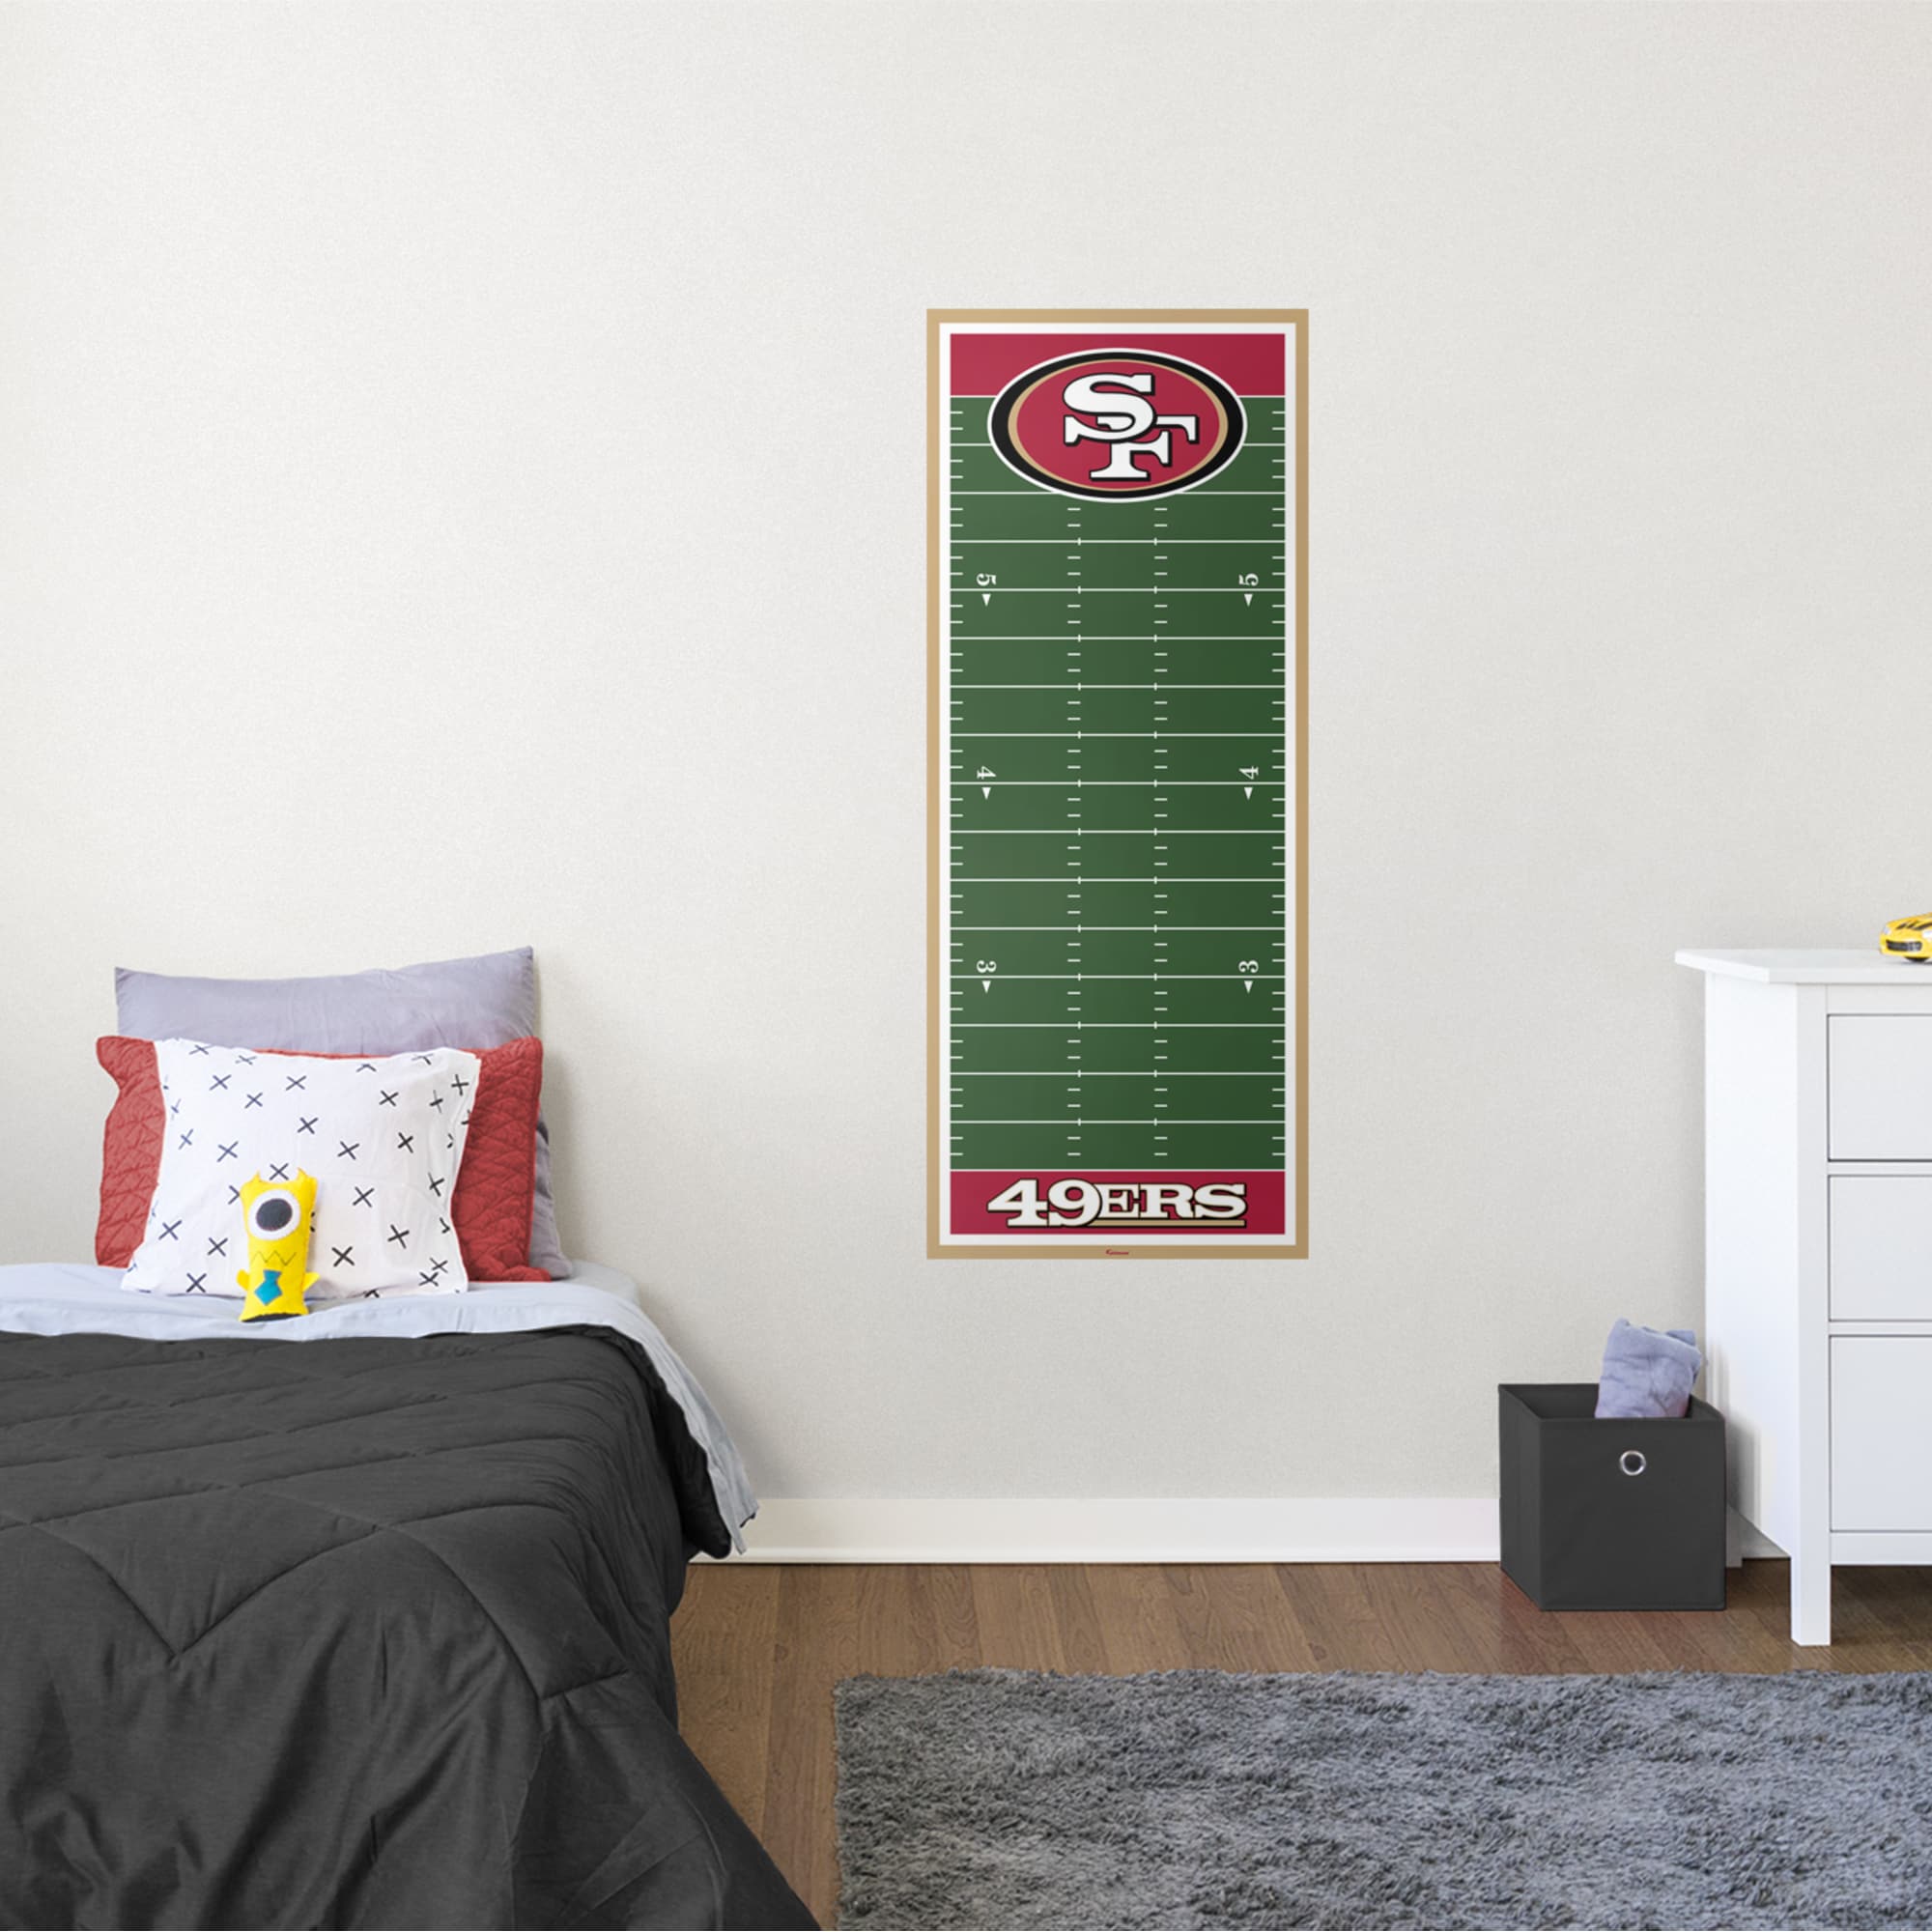 San Francisco 49ers: Growth Chart - Officially Licensed NFL Removable Wall Graphic 24.0"W x 59.0"H by Fathead | Vinyl